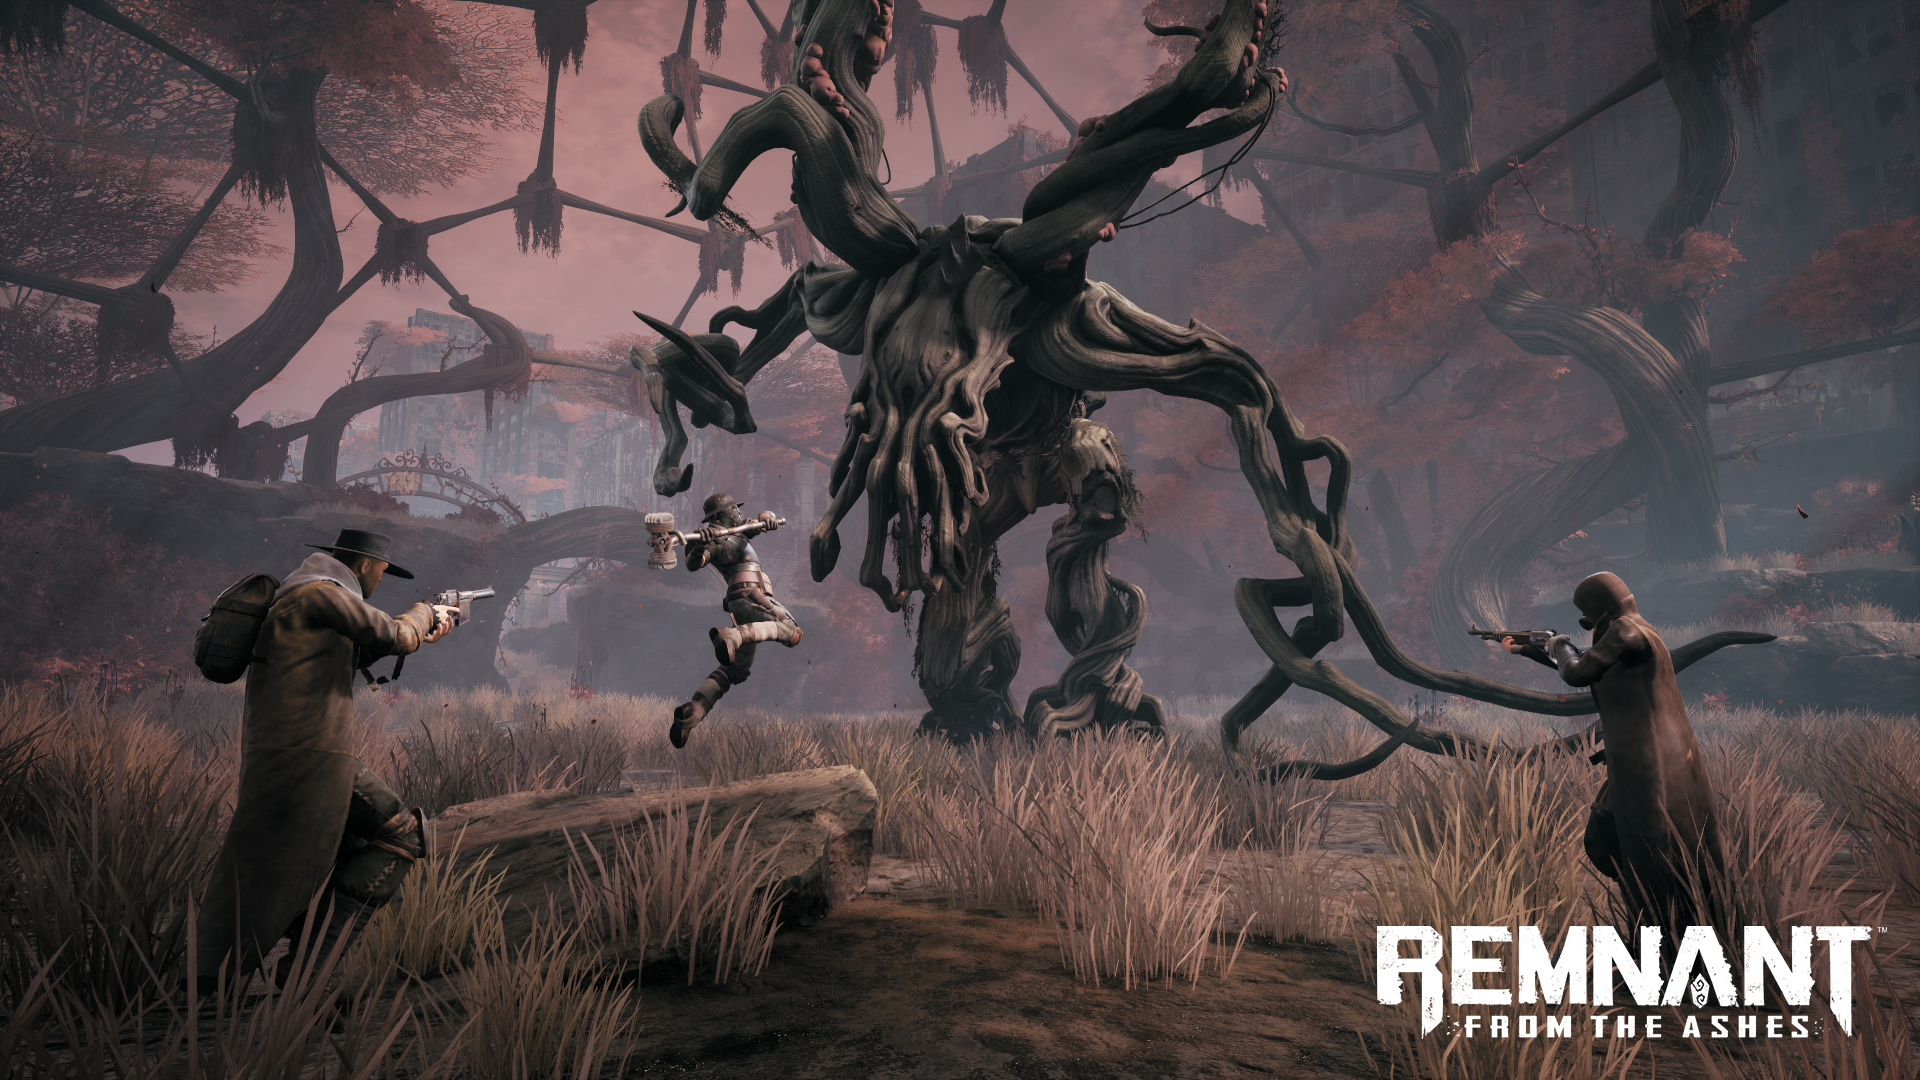 Remnant: From the Ashes release date announced; New trailer released